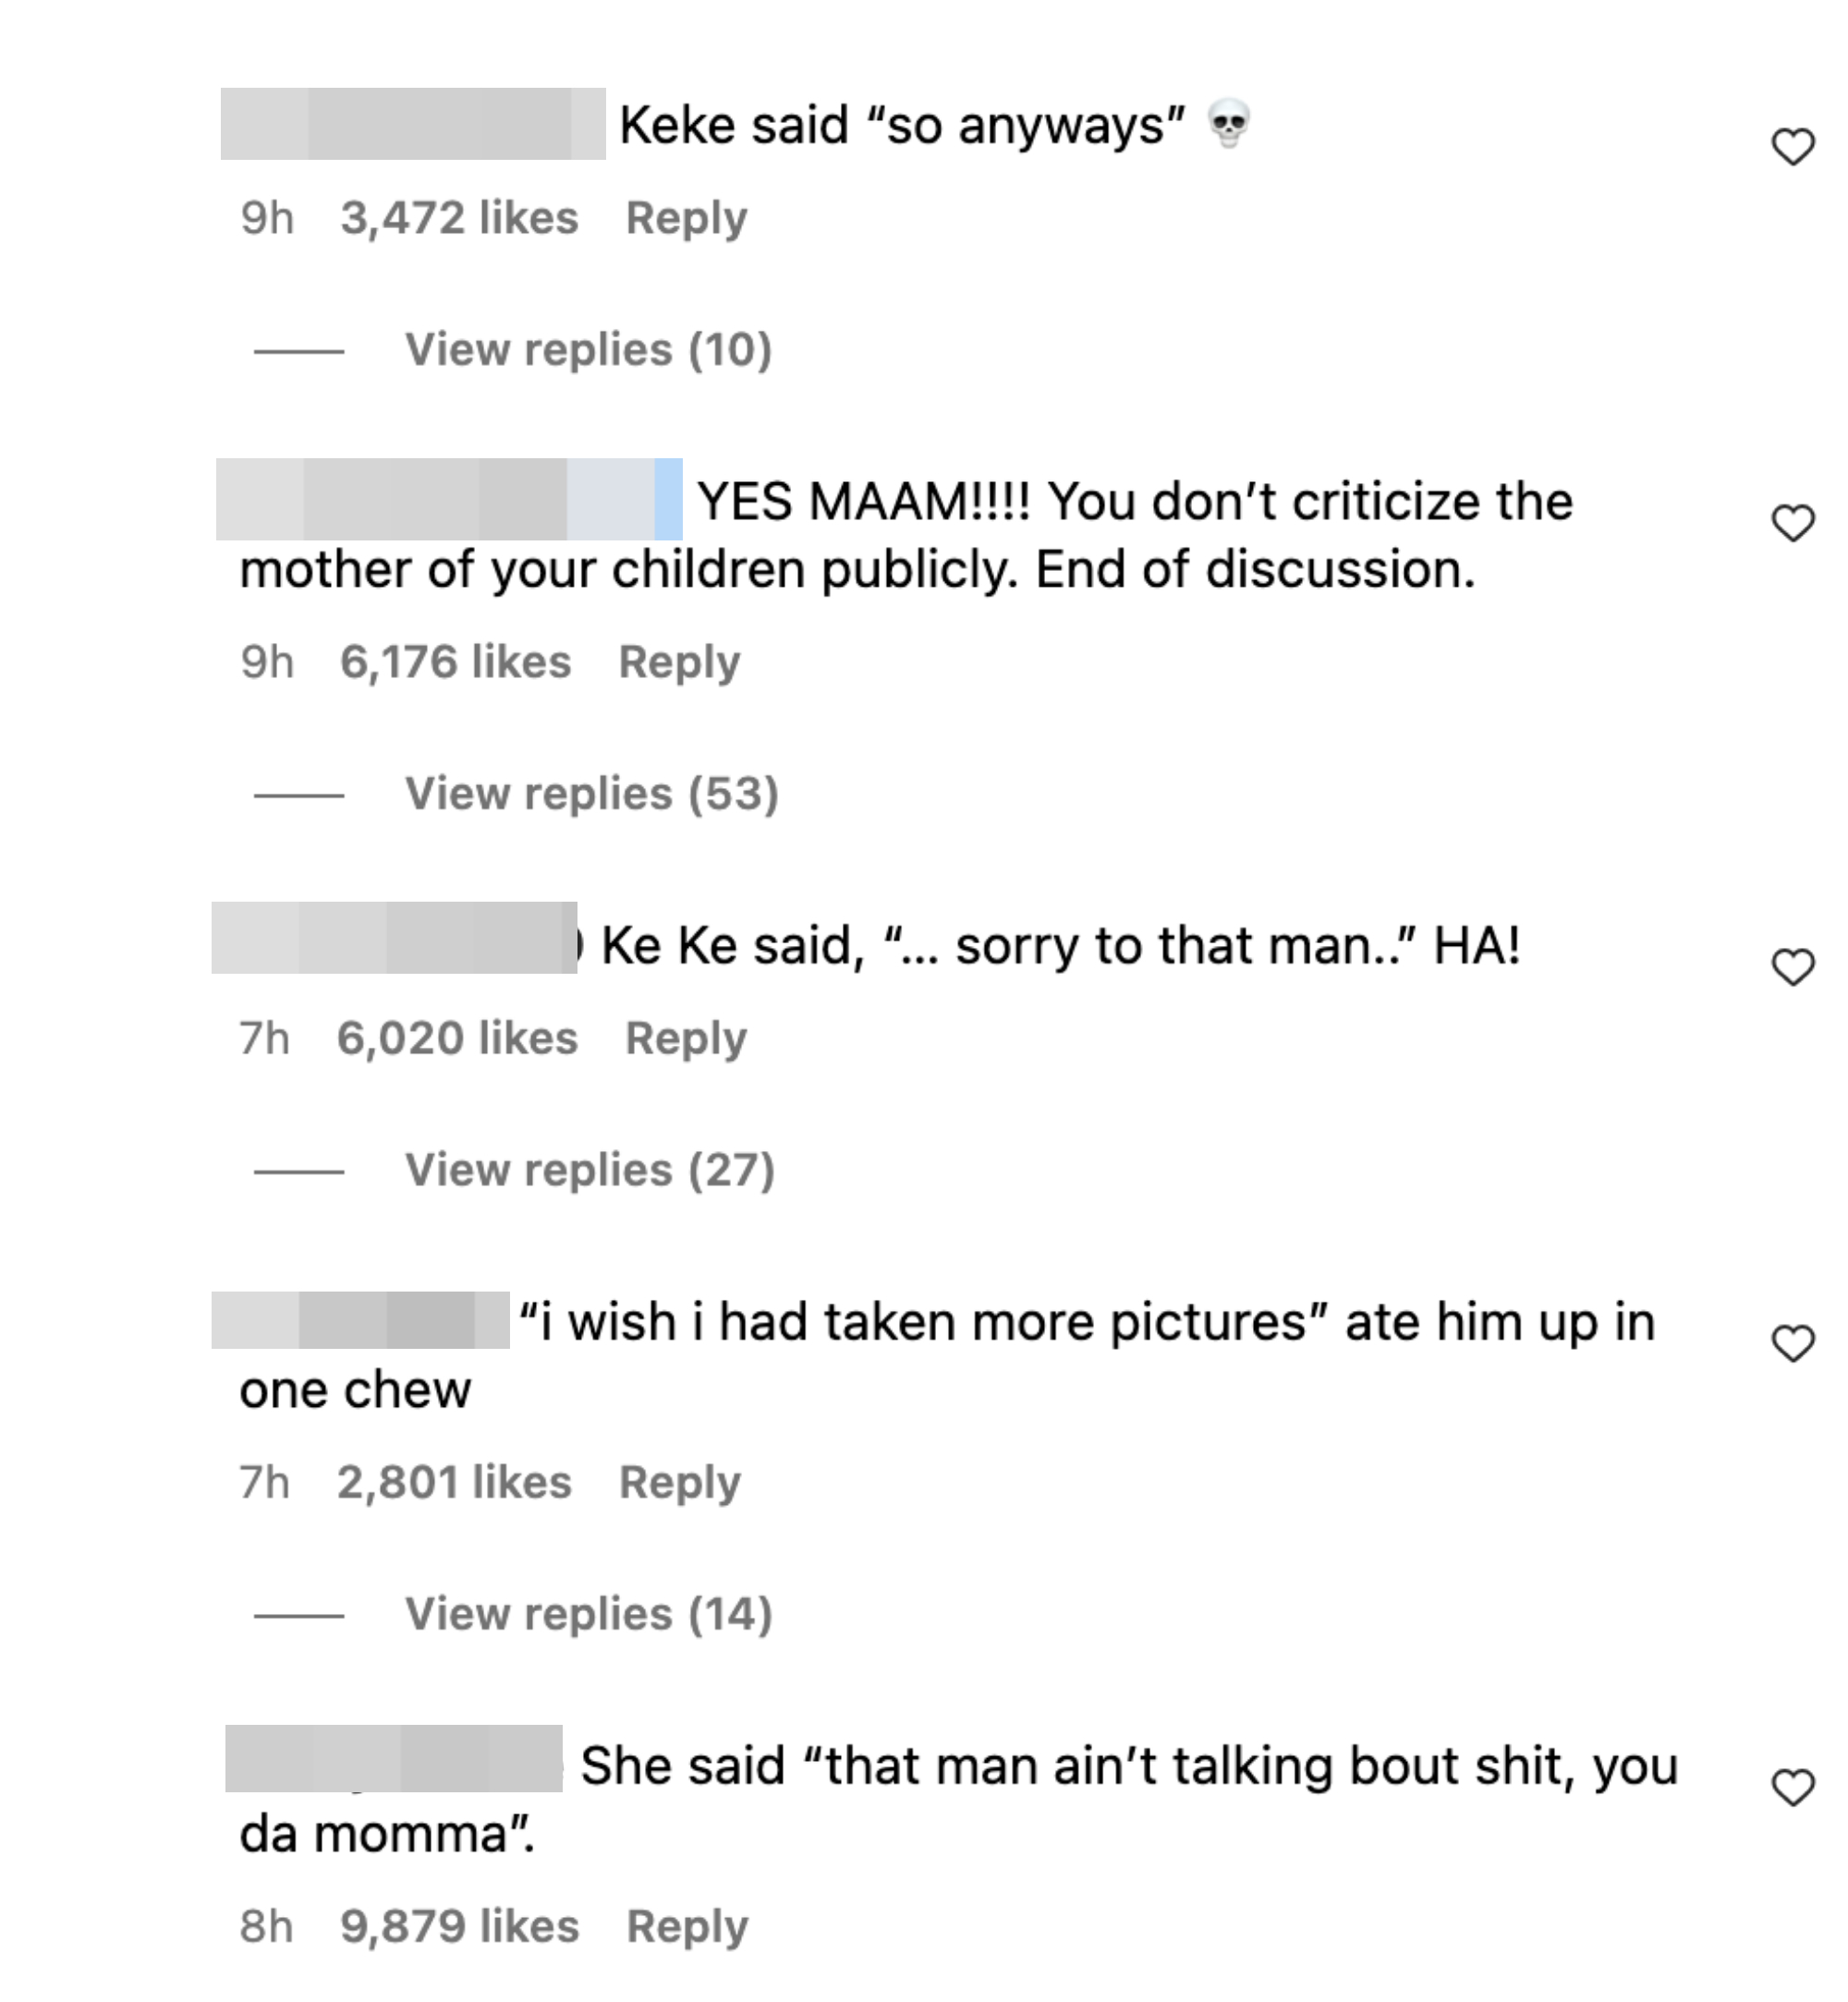 &quot;Keke said &#x27;so anyways,&#x27;&quot; &quot;YES MAAM!!!! You don&#x27;t criticize the mother of your children publicly,&quot; &quot;Keke said, &#x27;Sorry to that man!&#x27;&quot; and &quot;She said &#x27;that man ain&#x27;t talking about shit, yo da momma&quot; comments